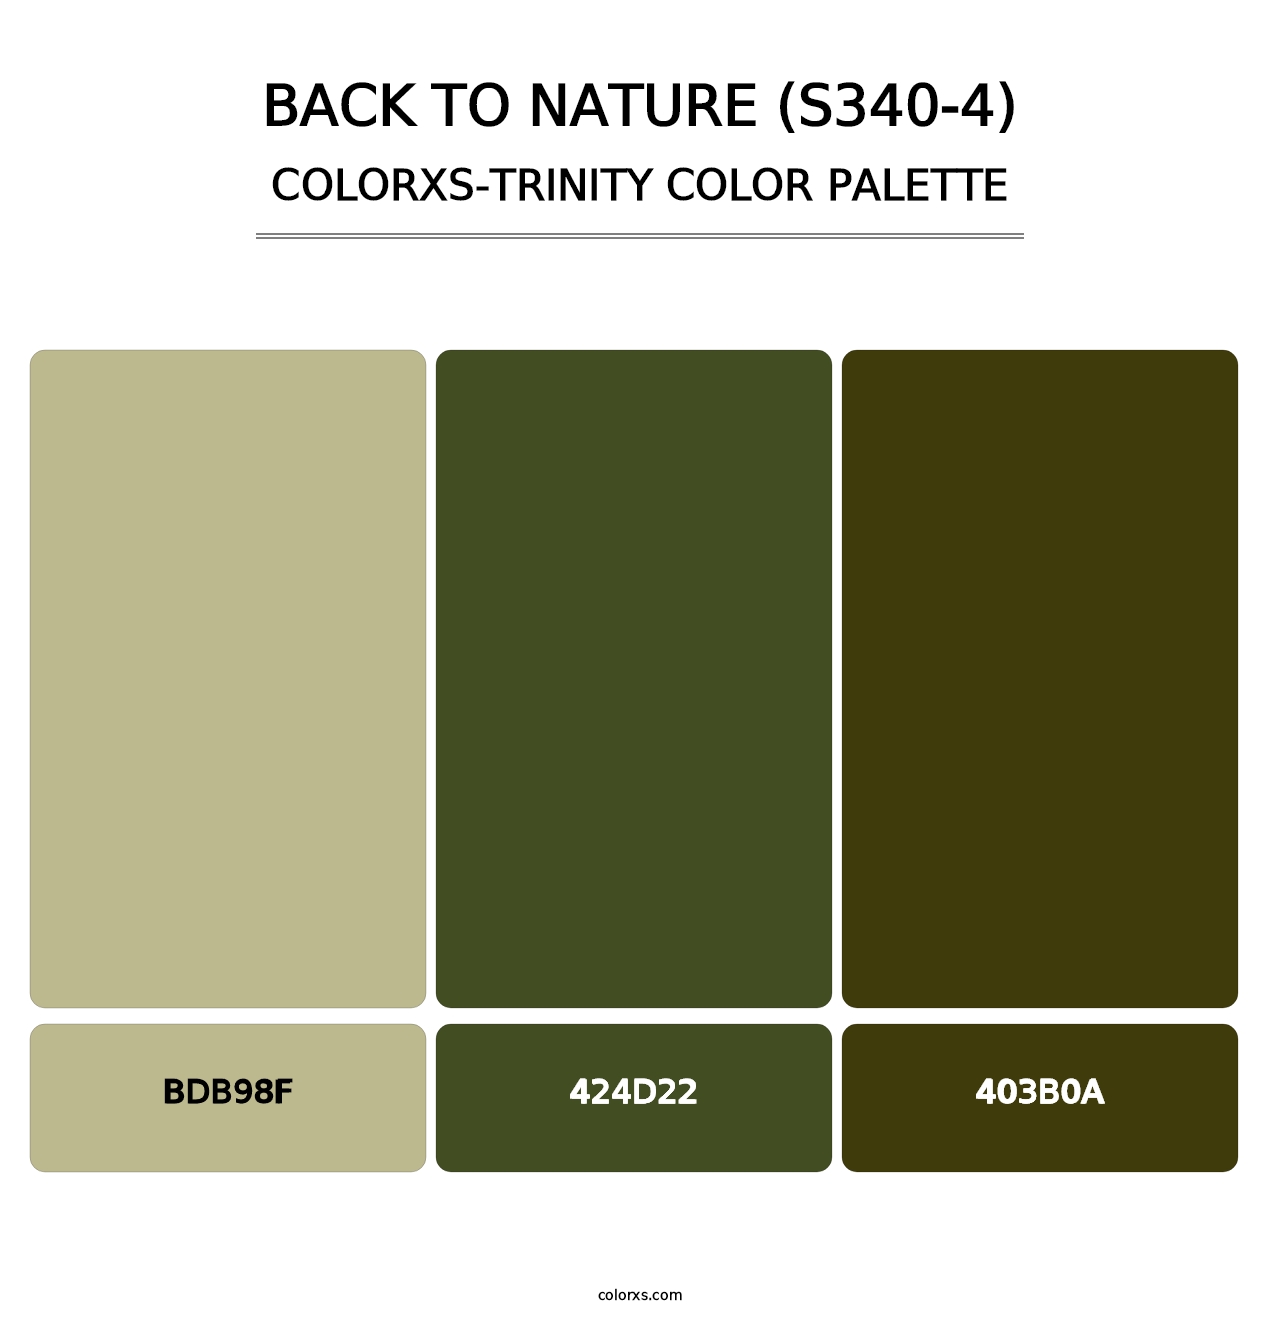 Back To Nature (S340-4) - Colorxs Trinity Palette